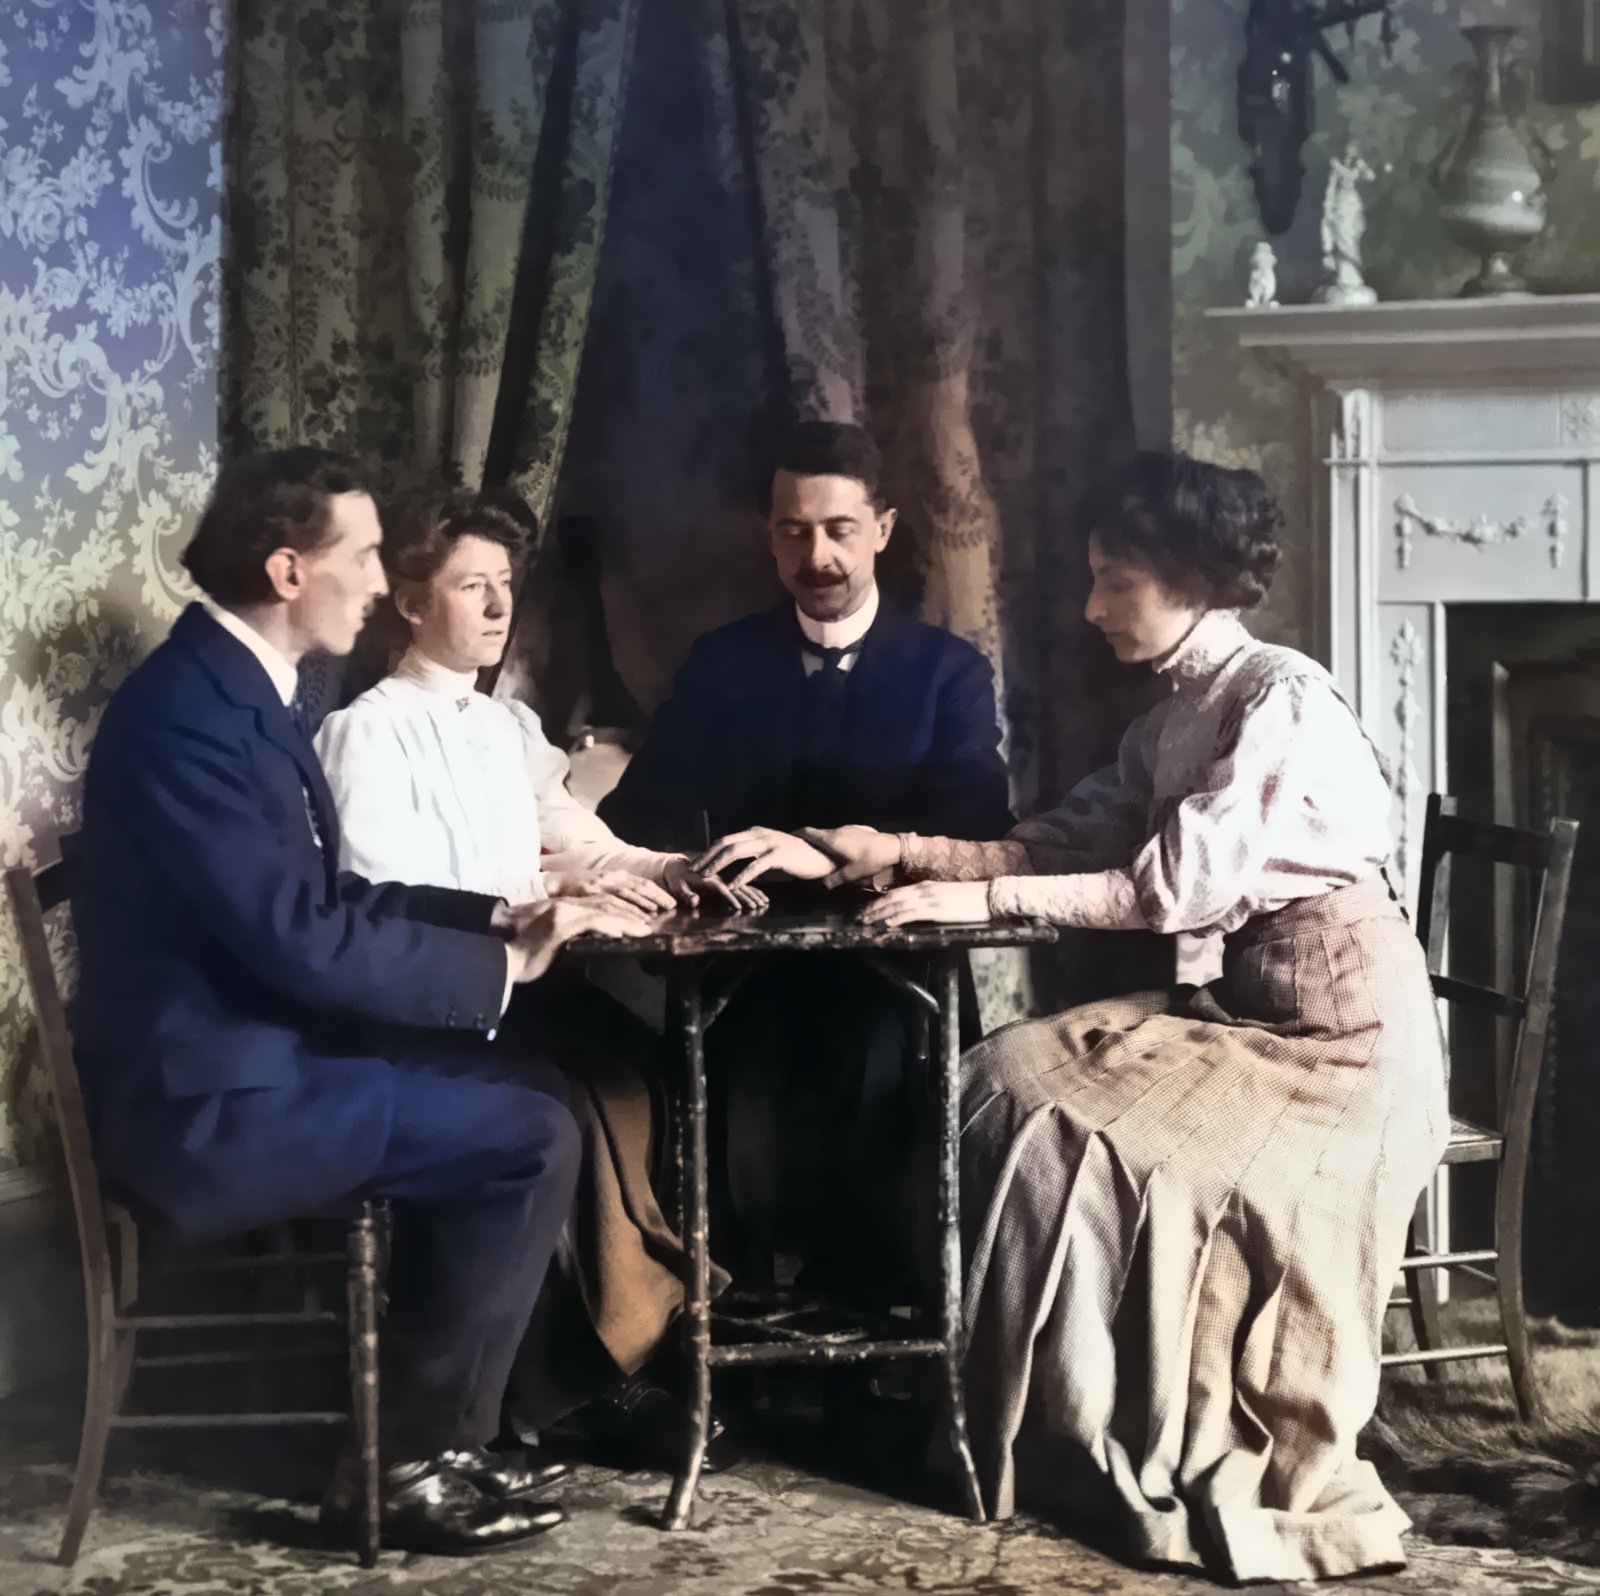 This is a black and white photo of four people sitting around a small table in a room with a fireplace and curtains. The people are dressed in formal Victorian clothing, with the two men wearing suits and the two women wearing dresses. The people are performing a séance led by Magician William Marriott.